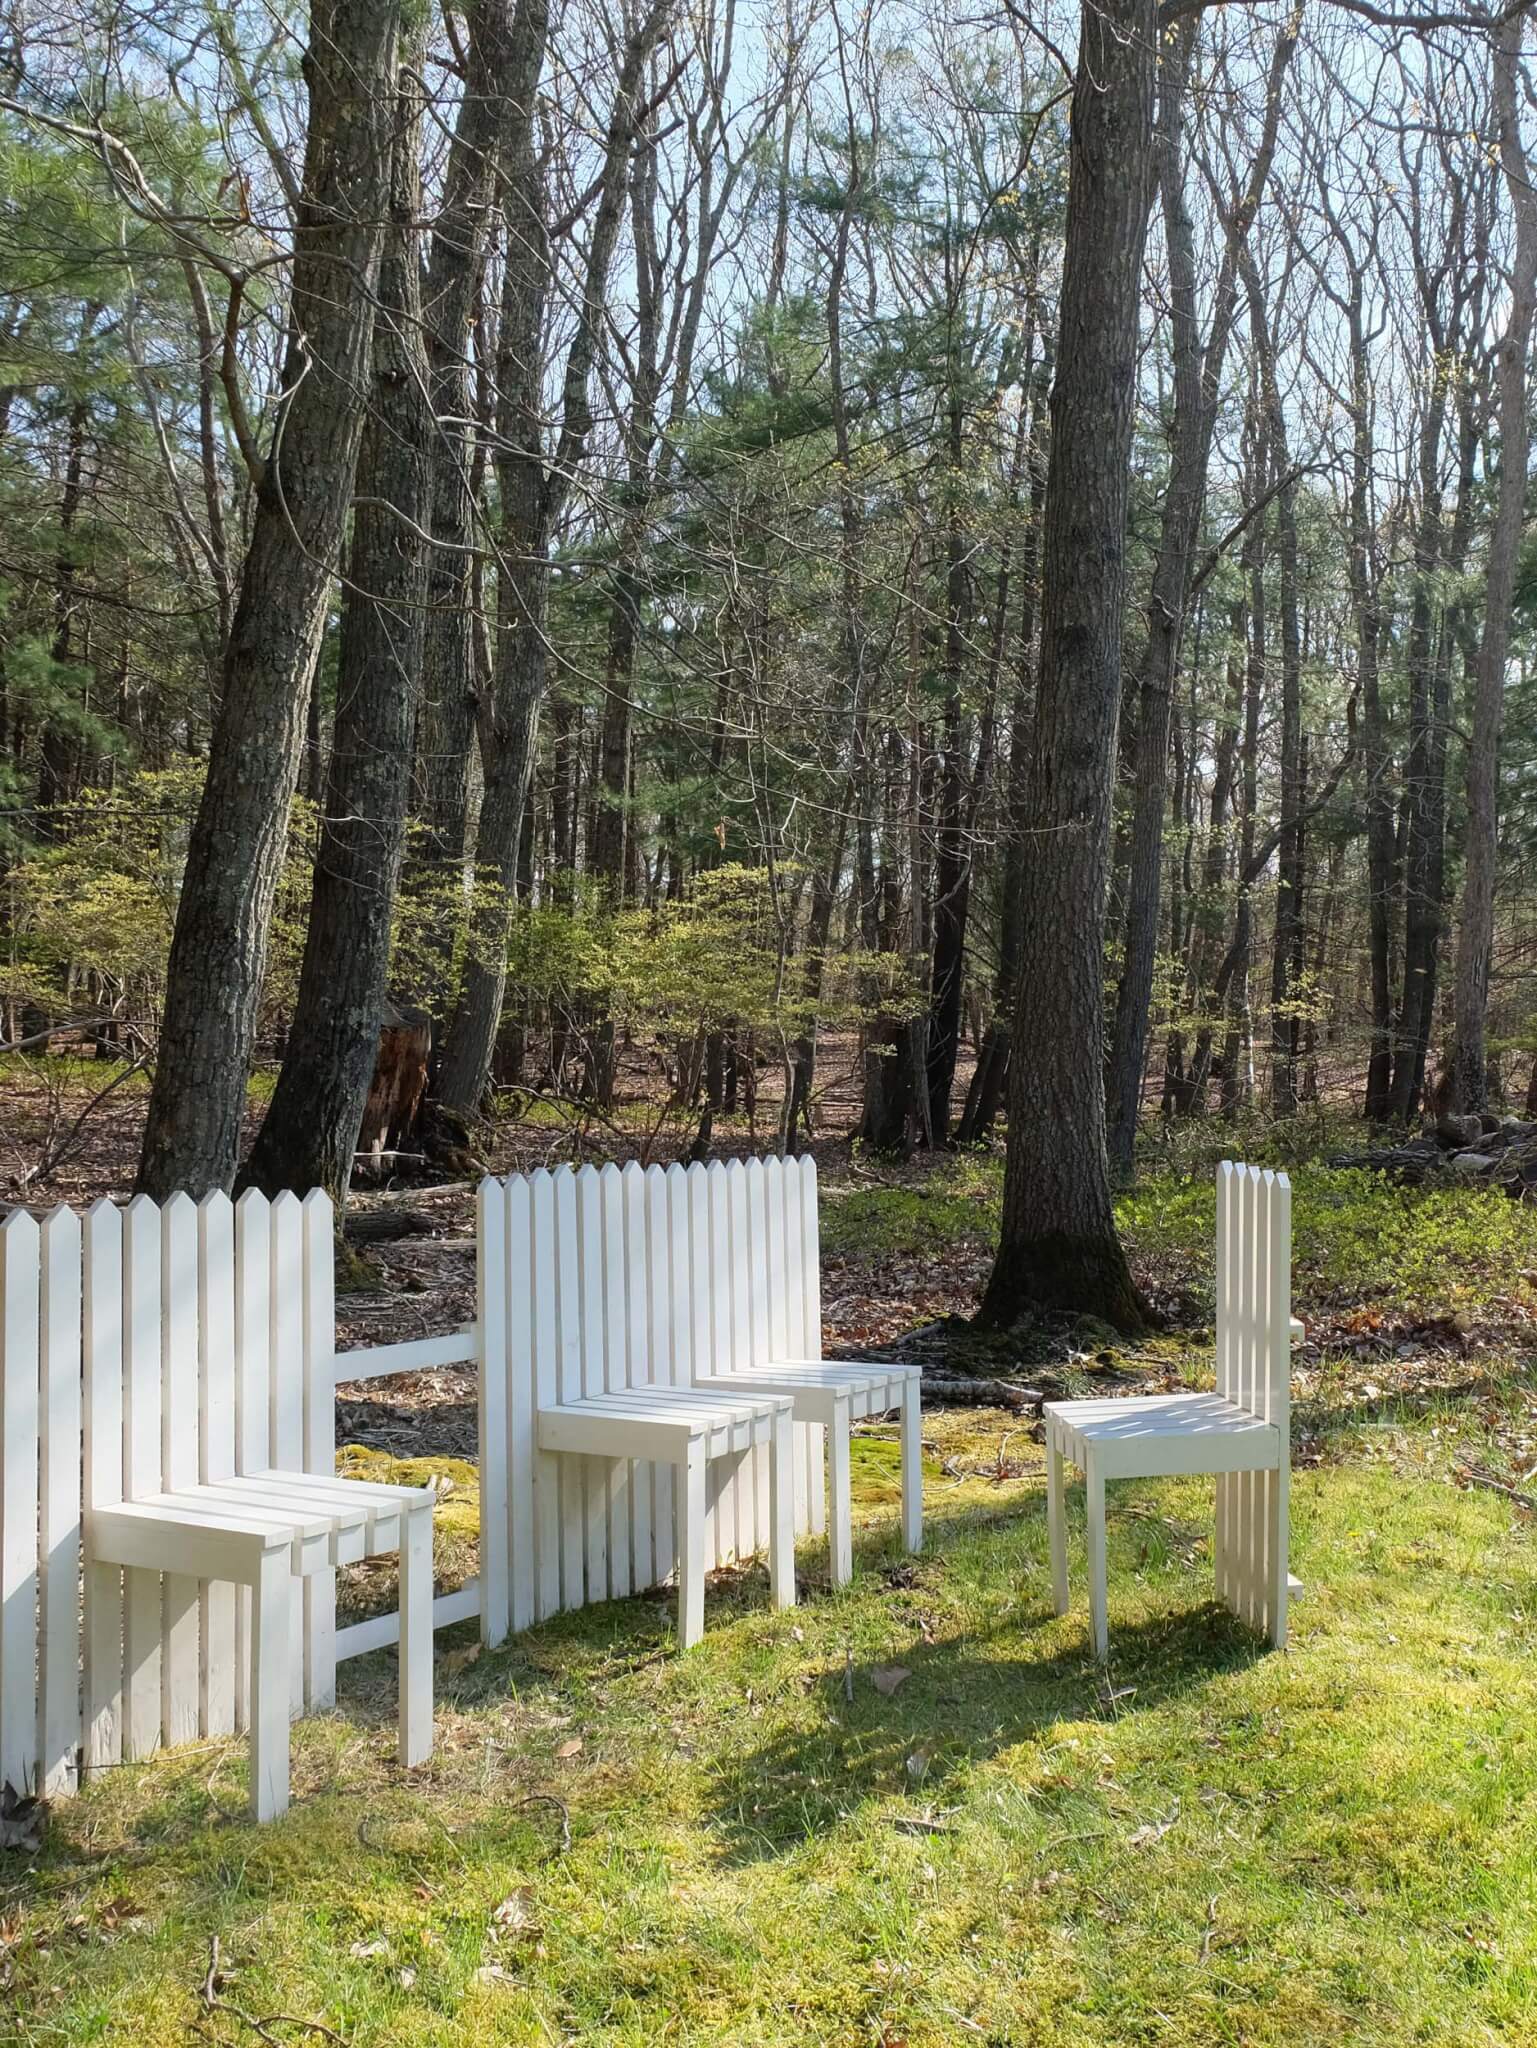 Chairs forming a fence